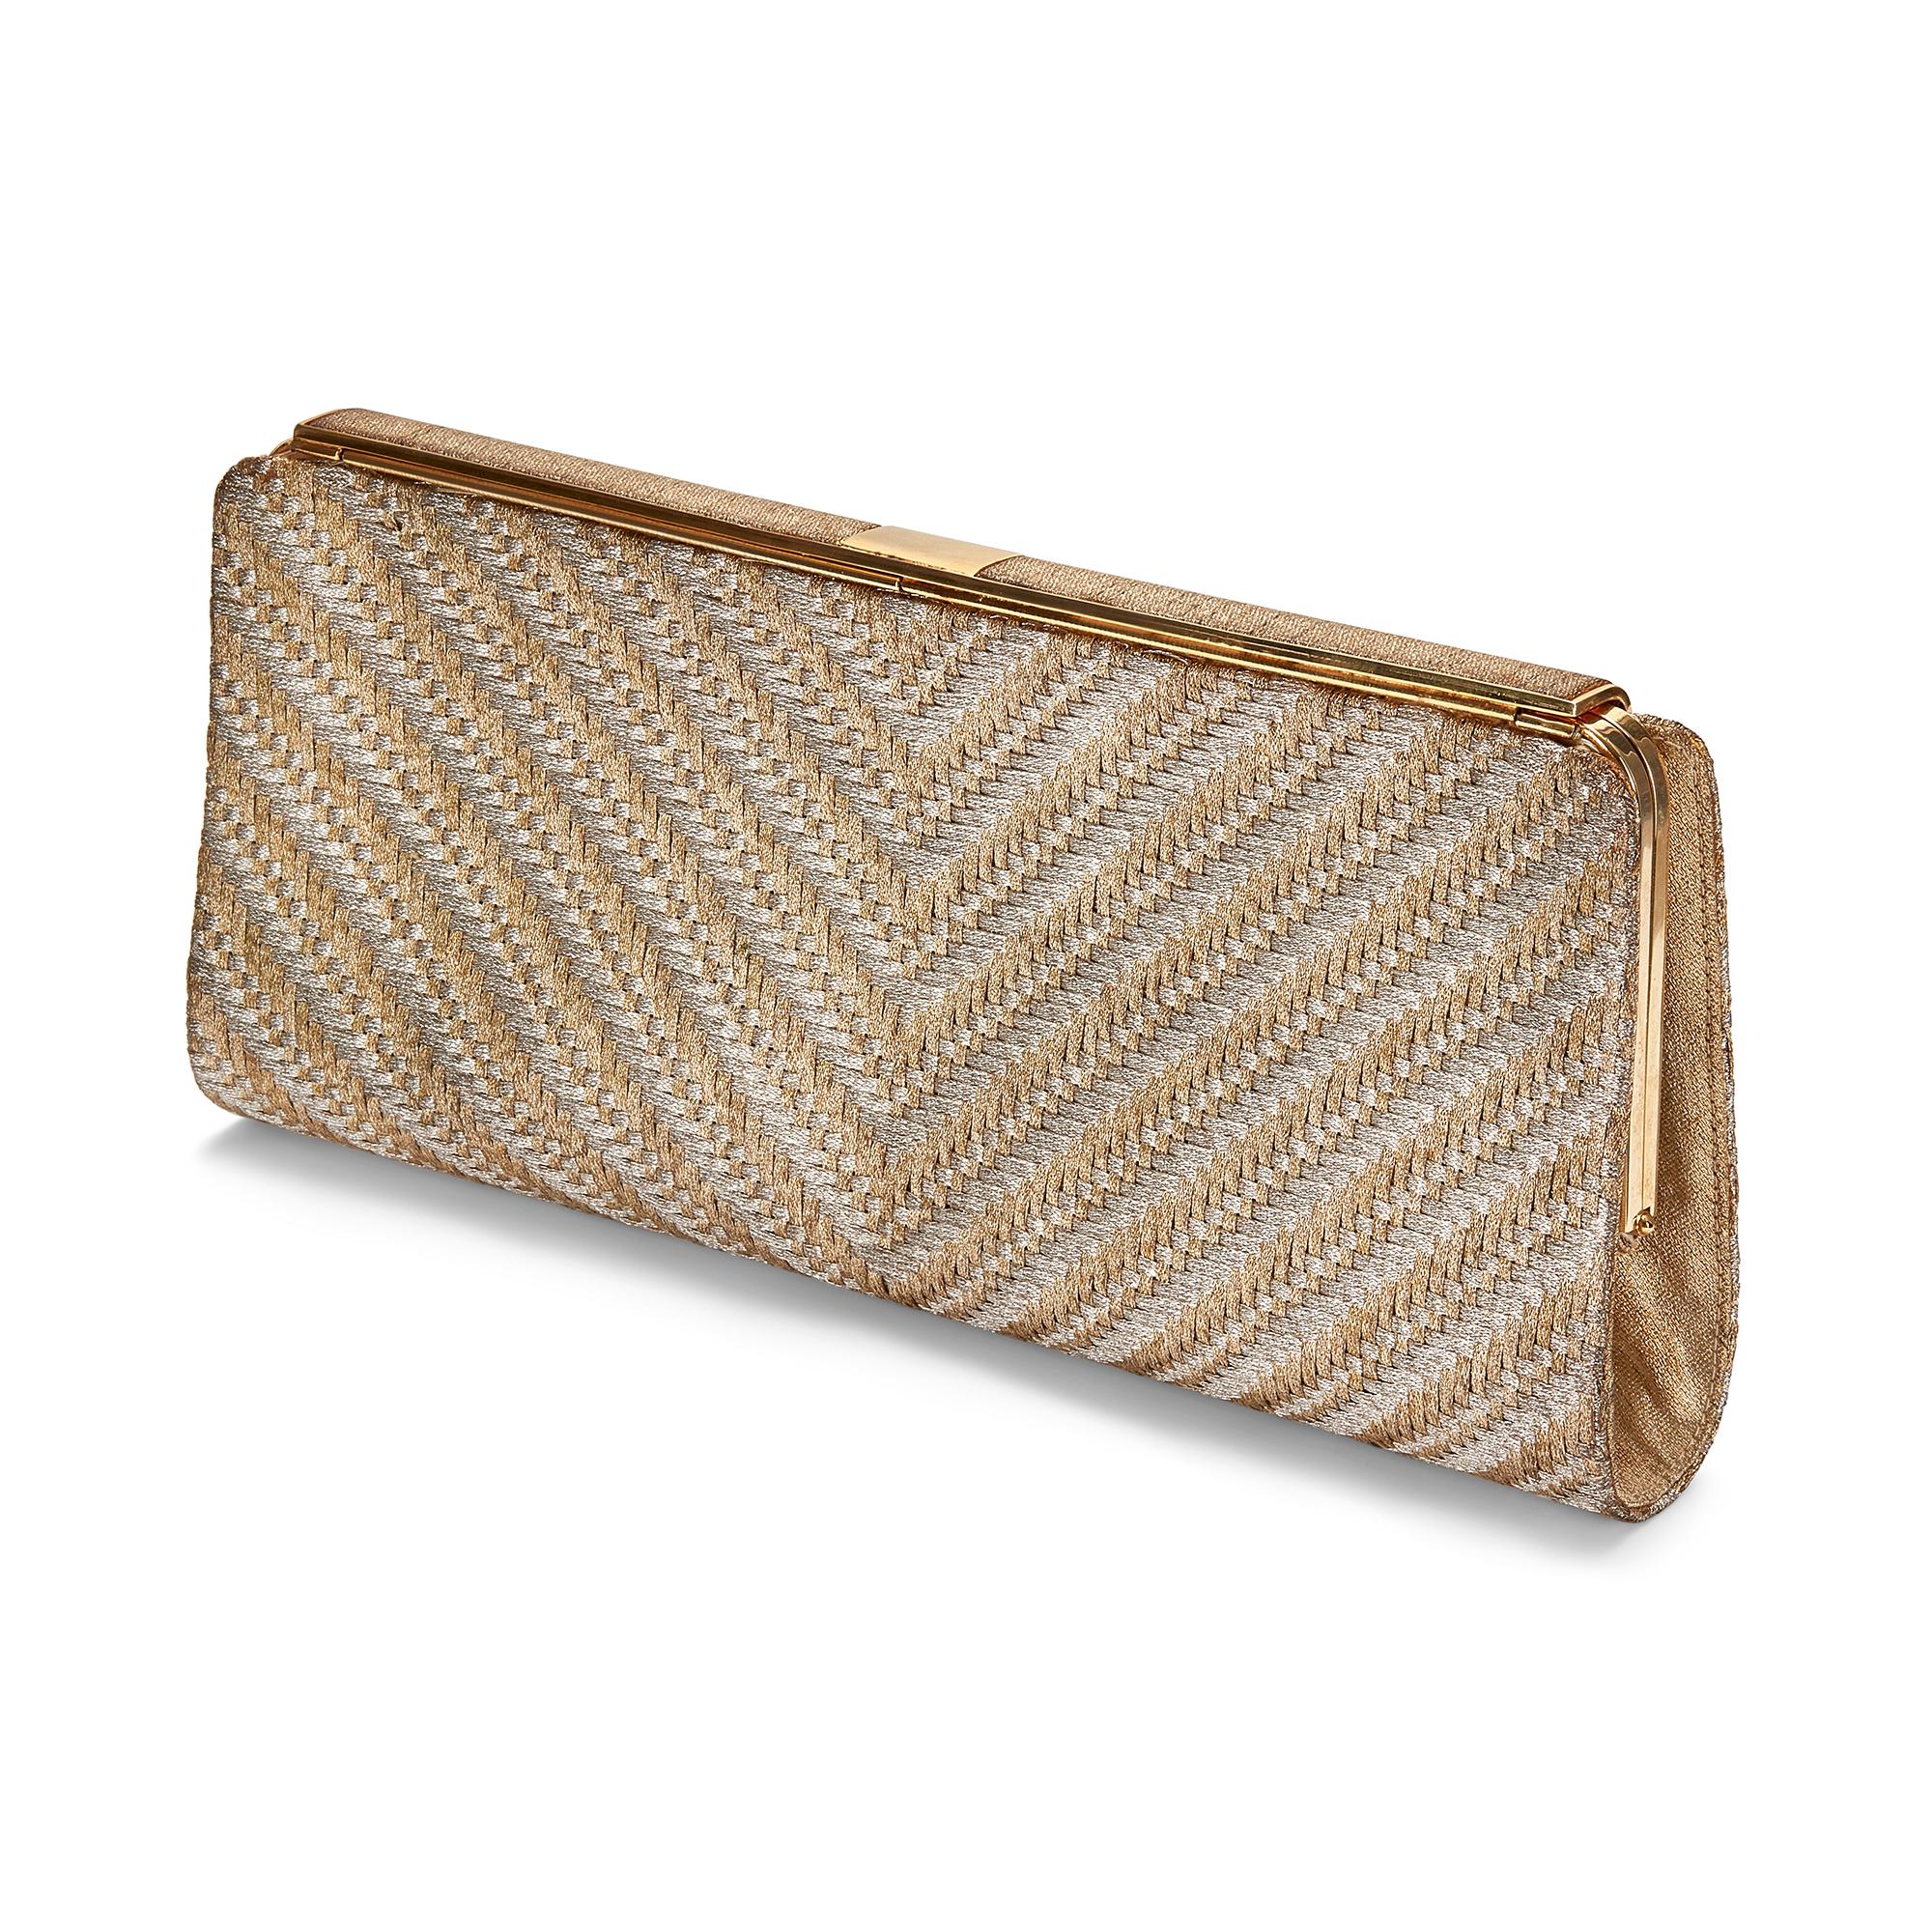 This Italian made woven lame bag was created in the 1960s. Crafted from interwoven metallic threads in gold and silver, it is edged with gold-toned hardware. It features a long chain strap that so that it can be used as a clutch bag or shoulder bag.